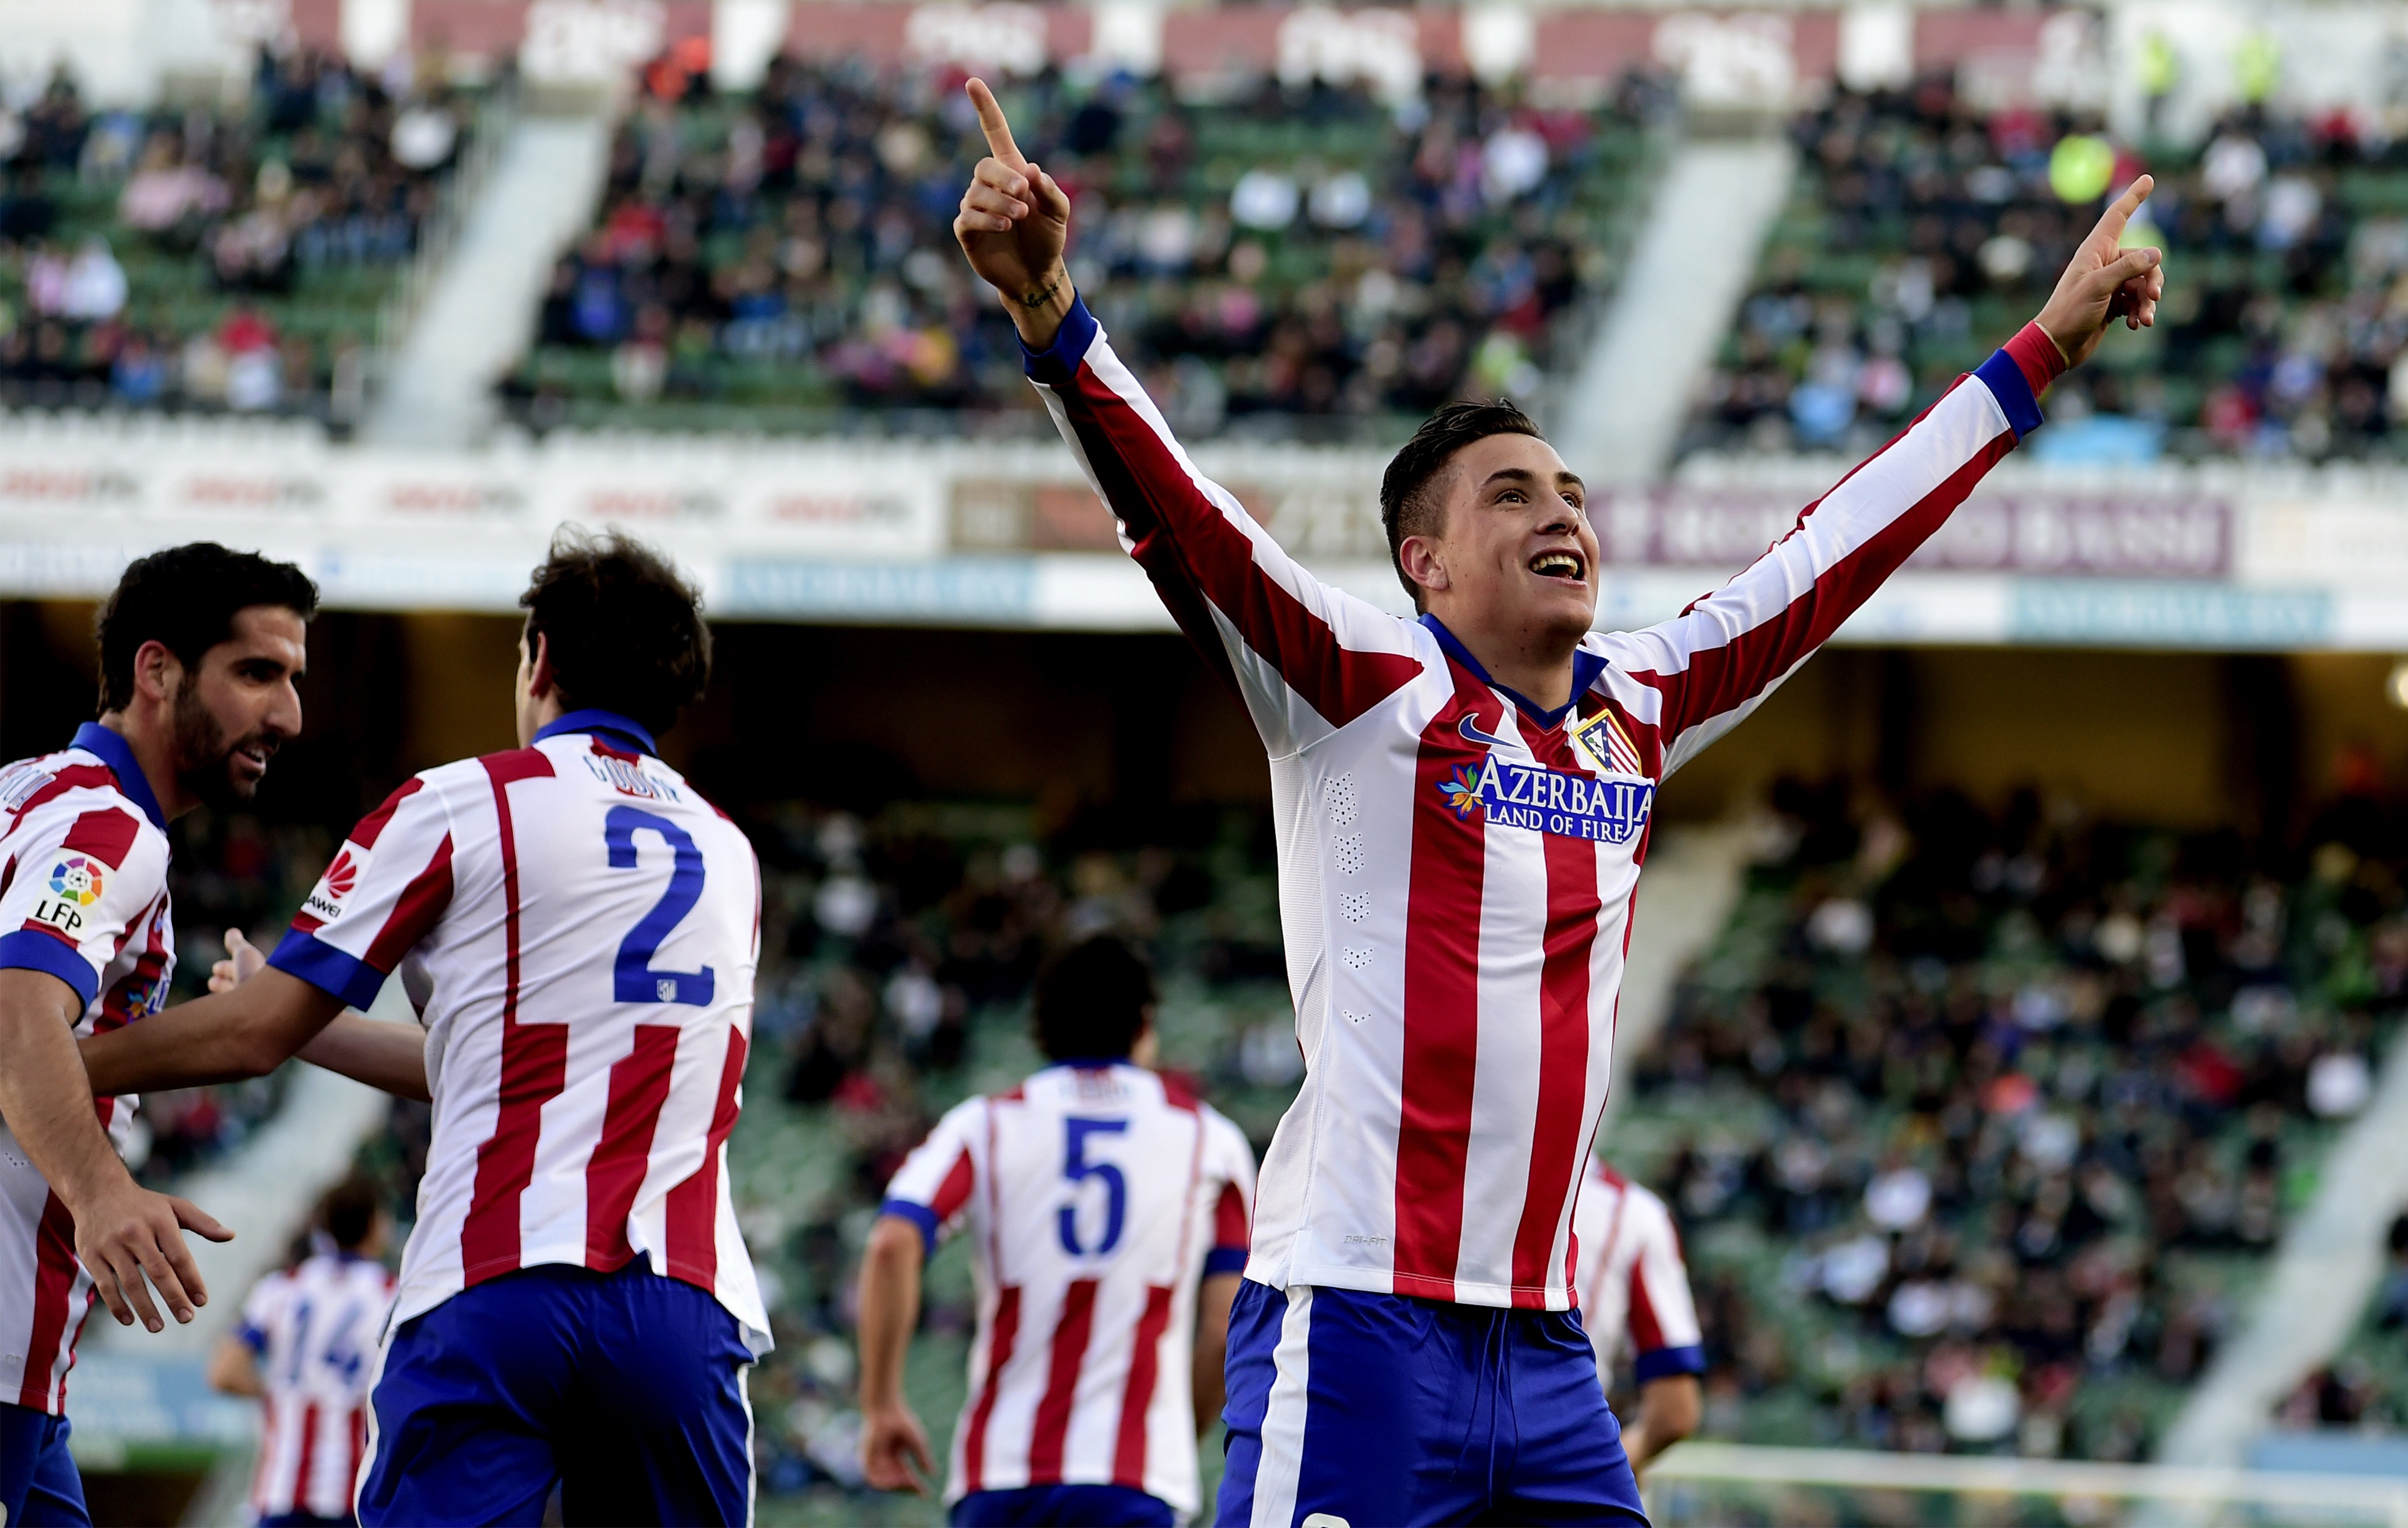 Atletico Madrid's Uruguayan defender Jose Maria Gimenez celebrates after scoring during the Spanish league football match Elche FC vs Club Atletico Madrid at the Martin Valero stadium in Valencia on December 6, 2014.     (Photo credit should read JOSE JORDAN/AFP/Getty Images)